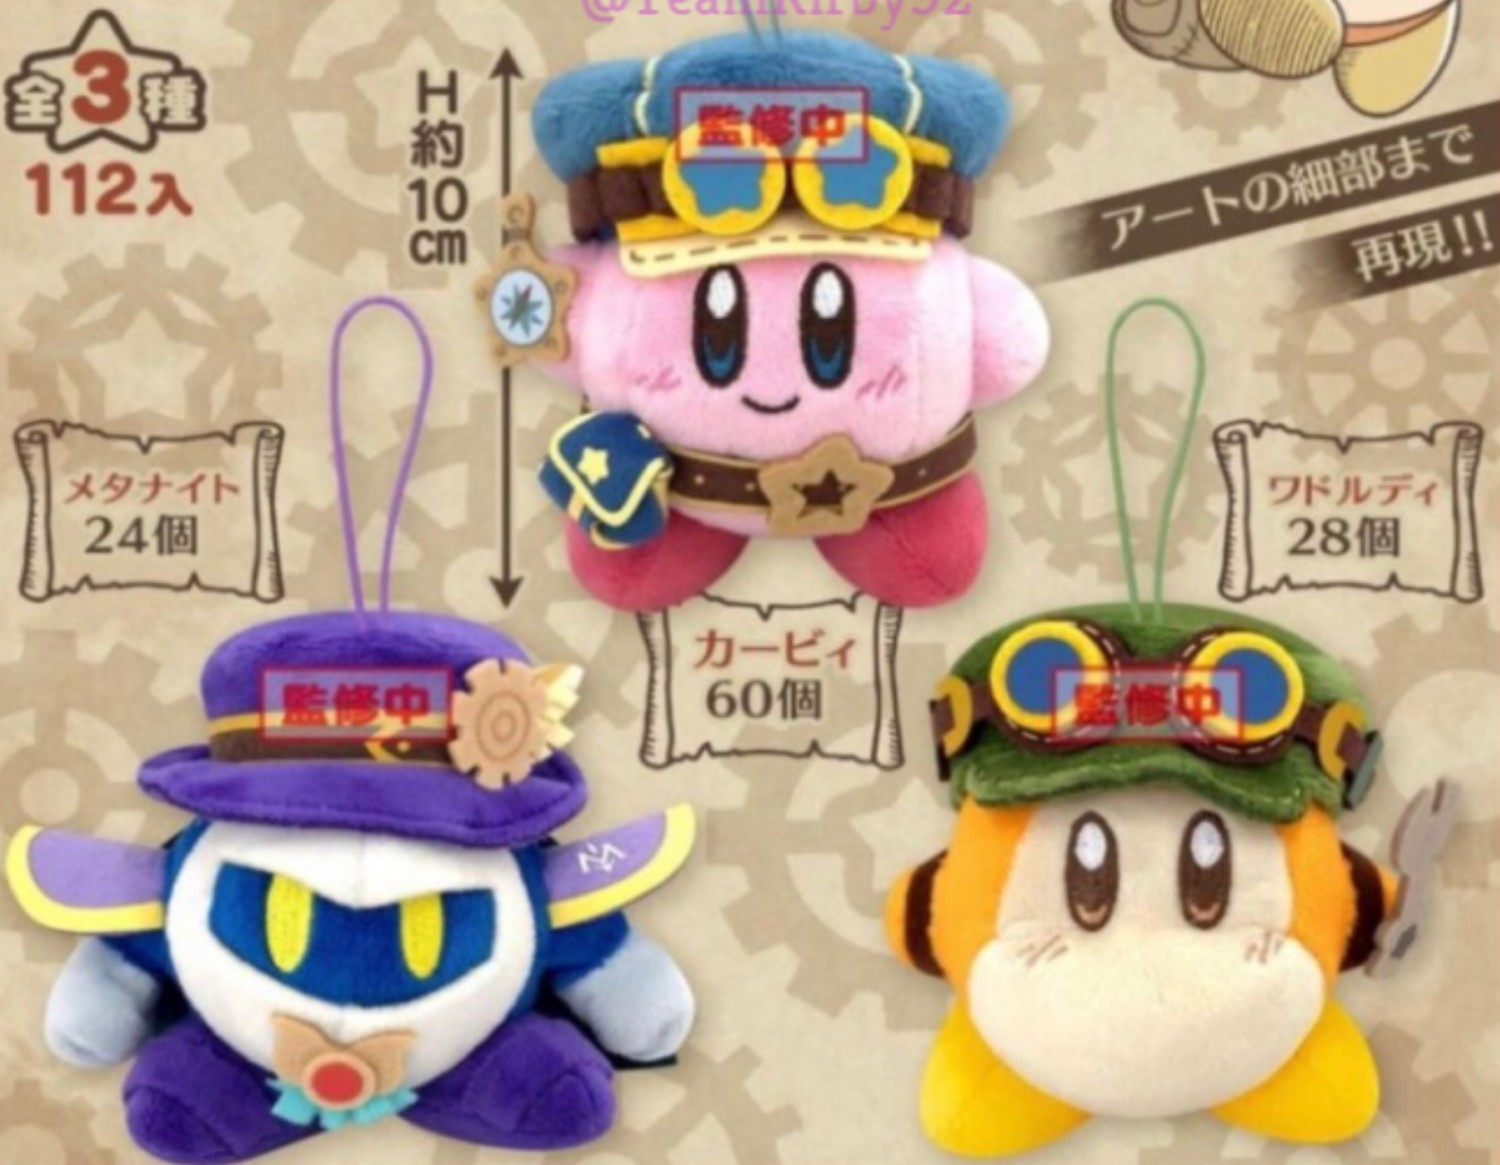 First Look At Kirby's Dreamy Gear Plushies – NintendoSoup